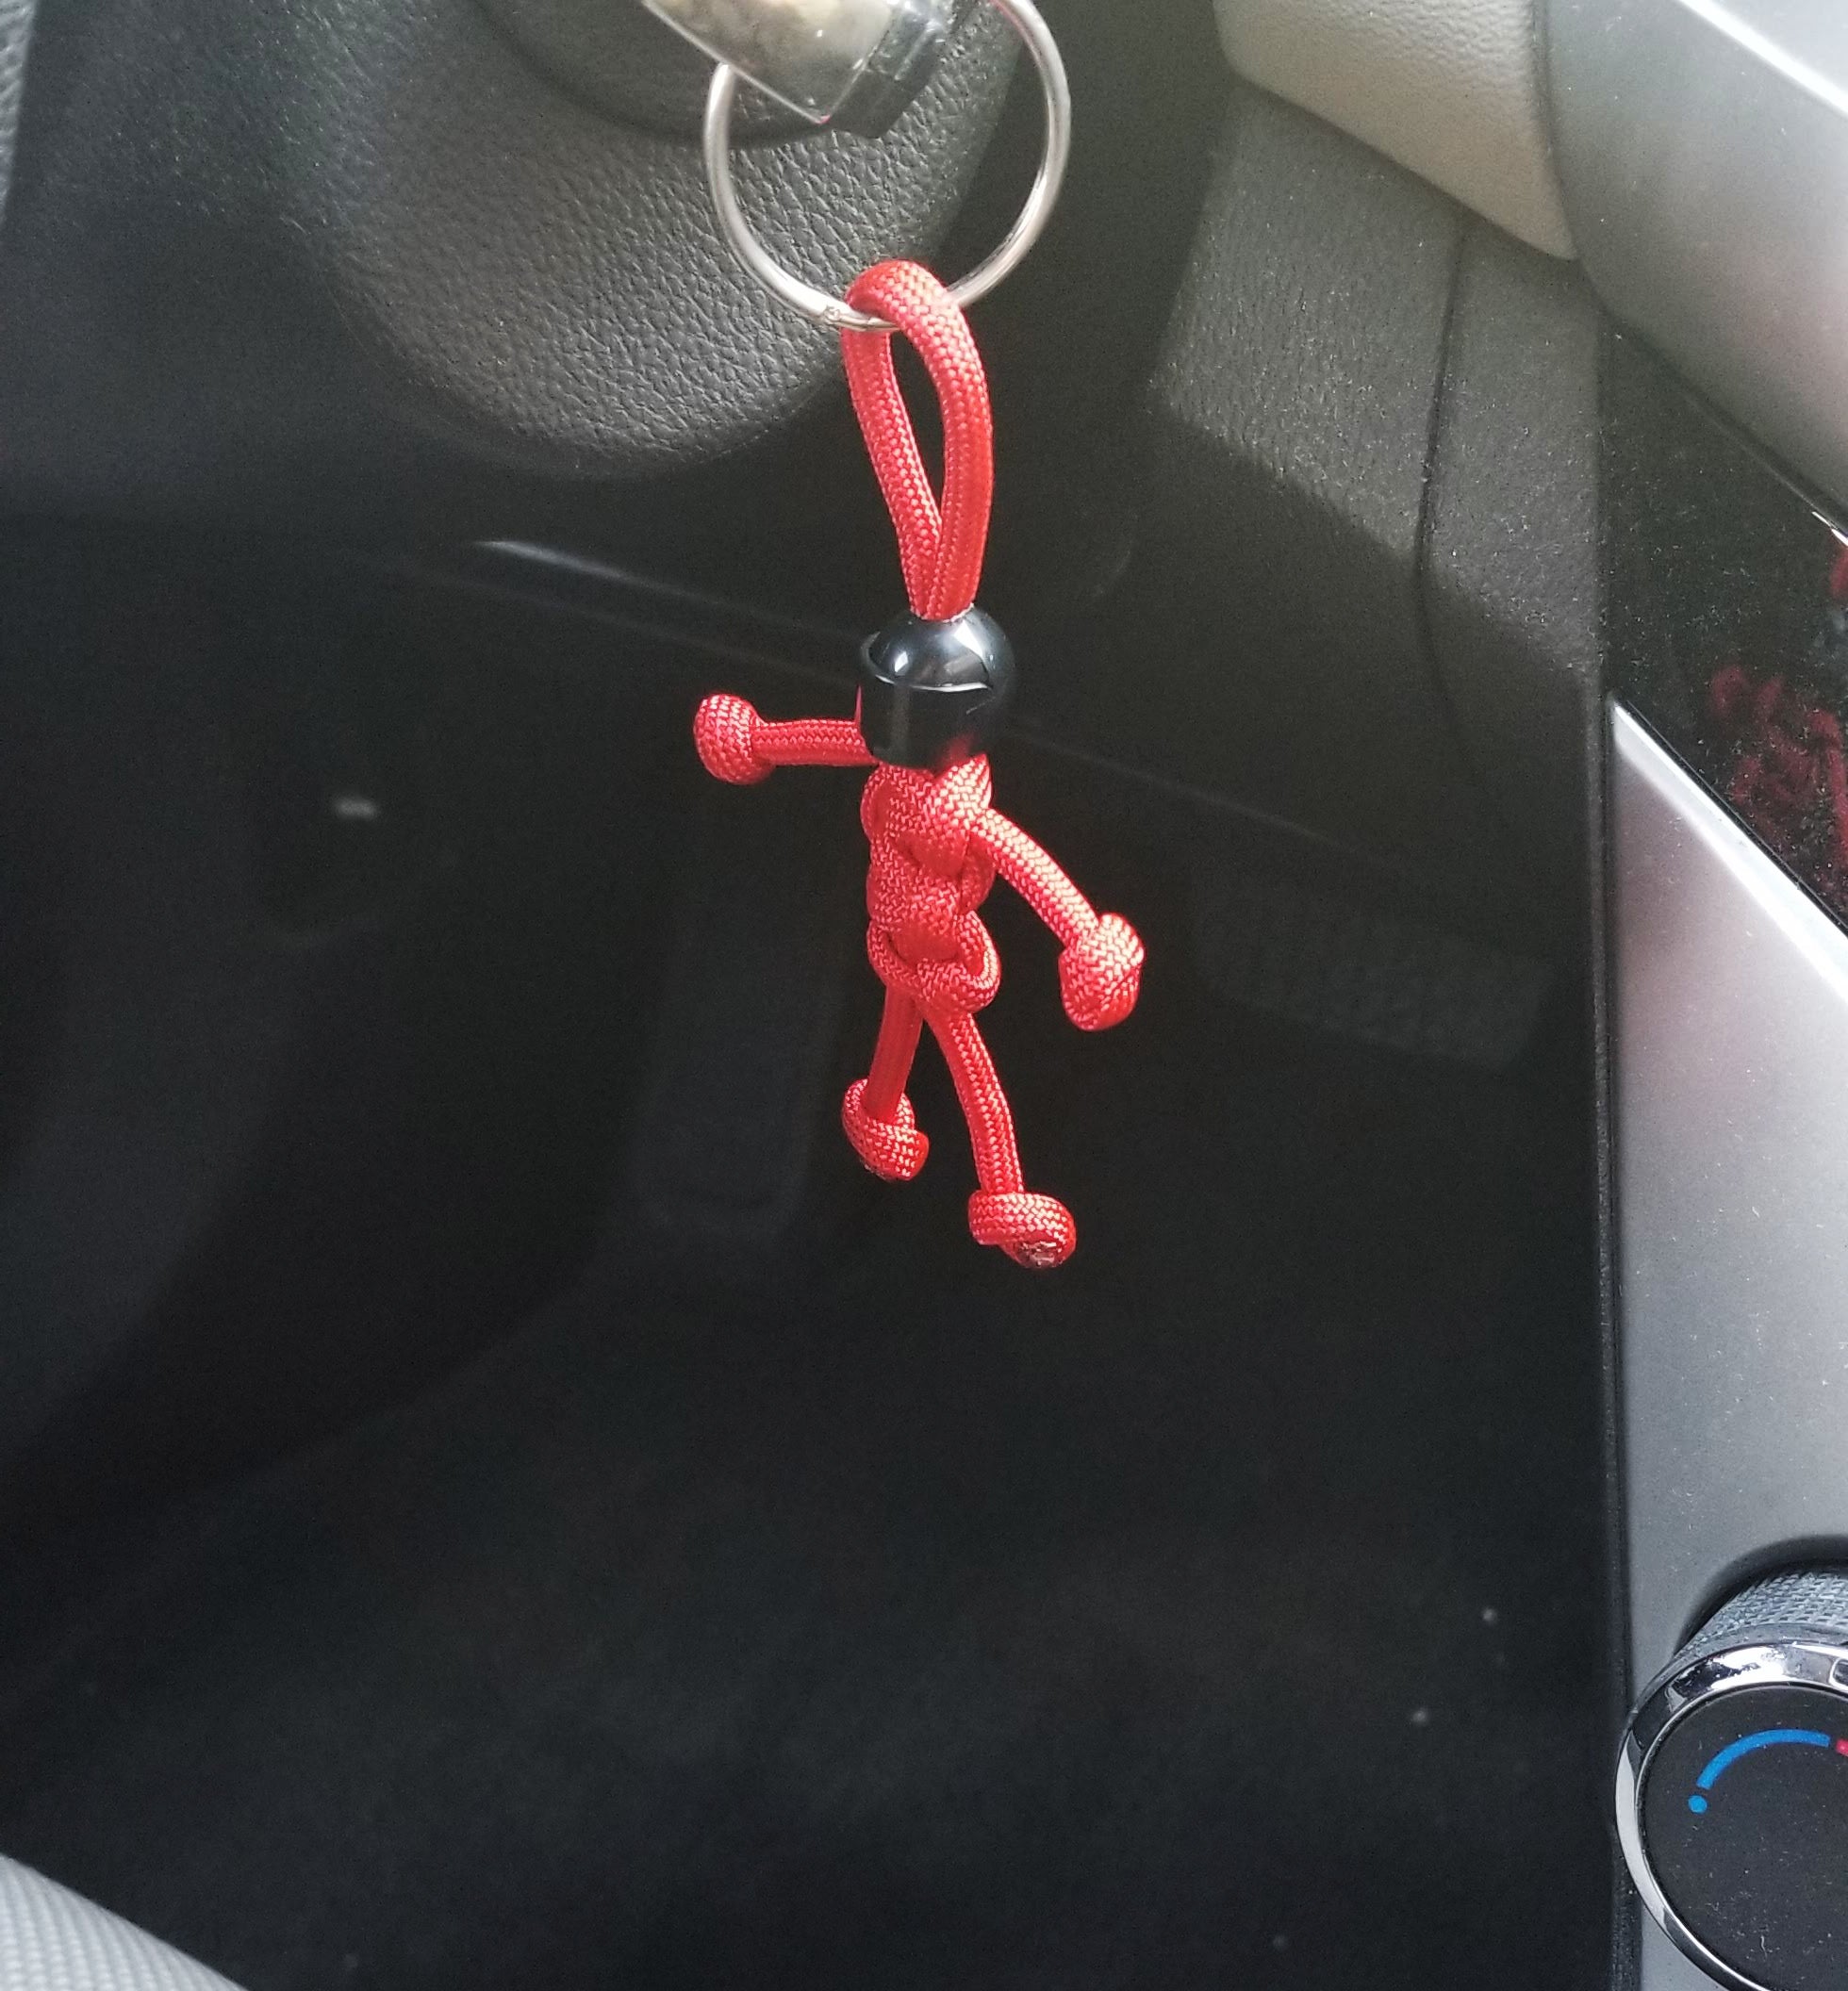 Firefighter Keychain, Paracord Buddy